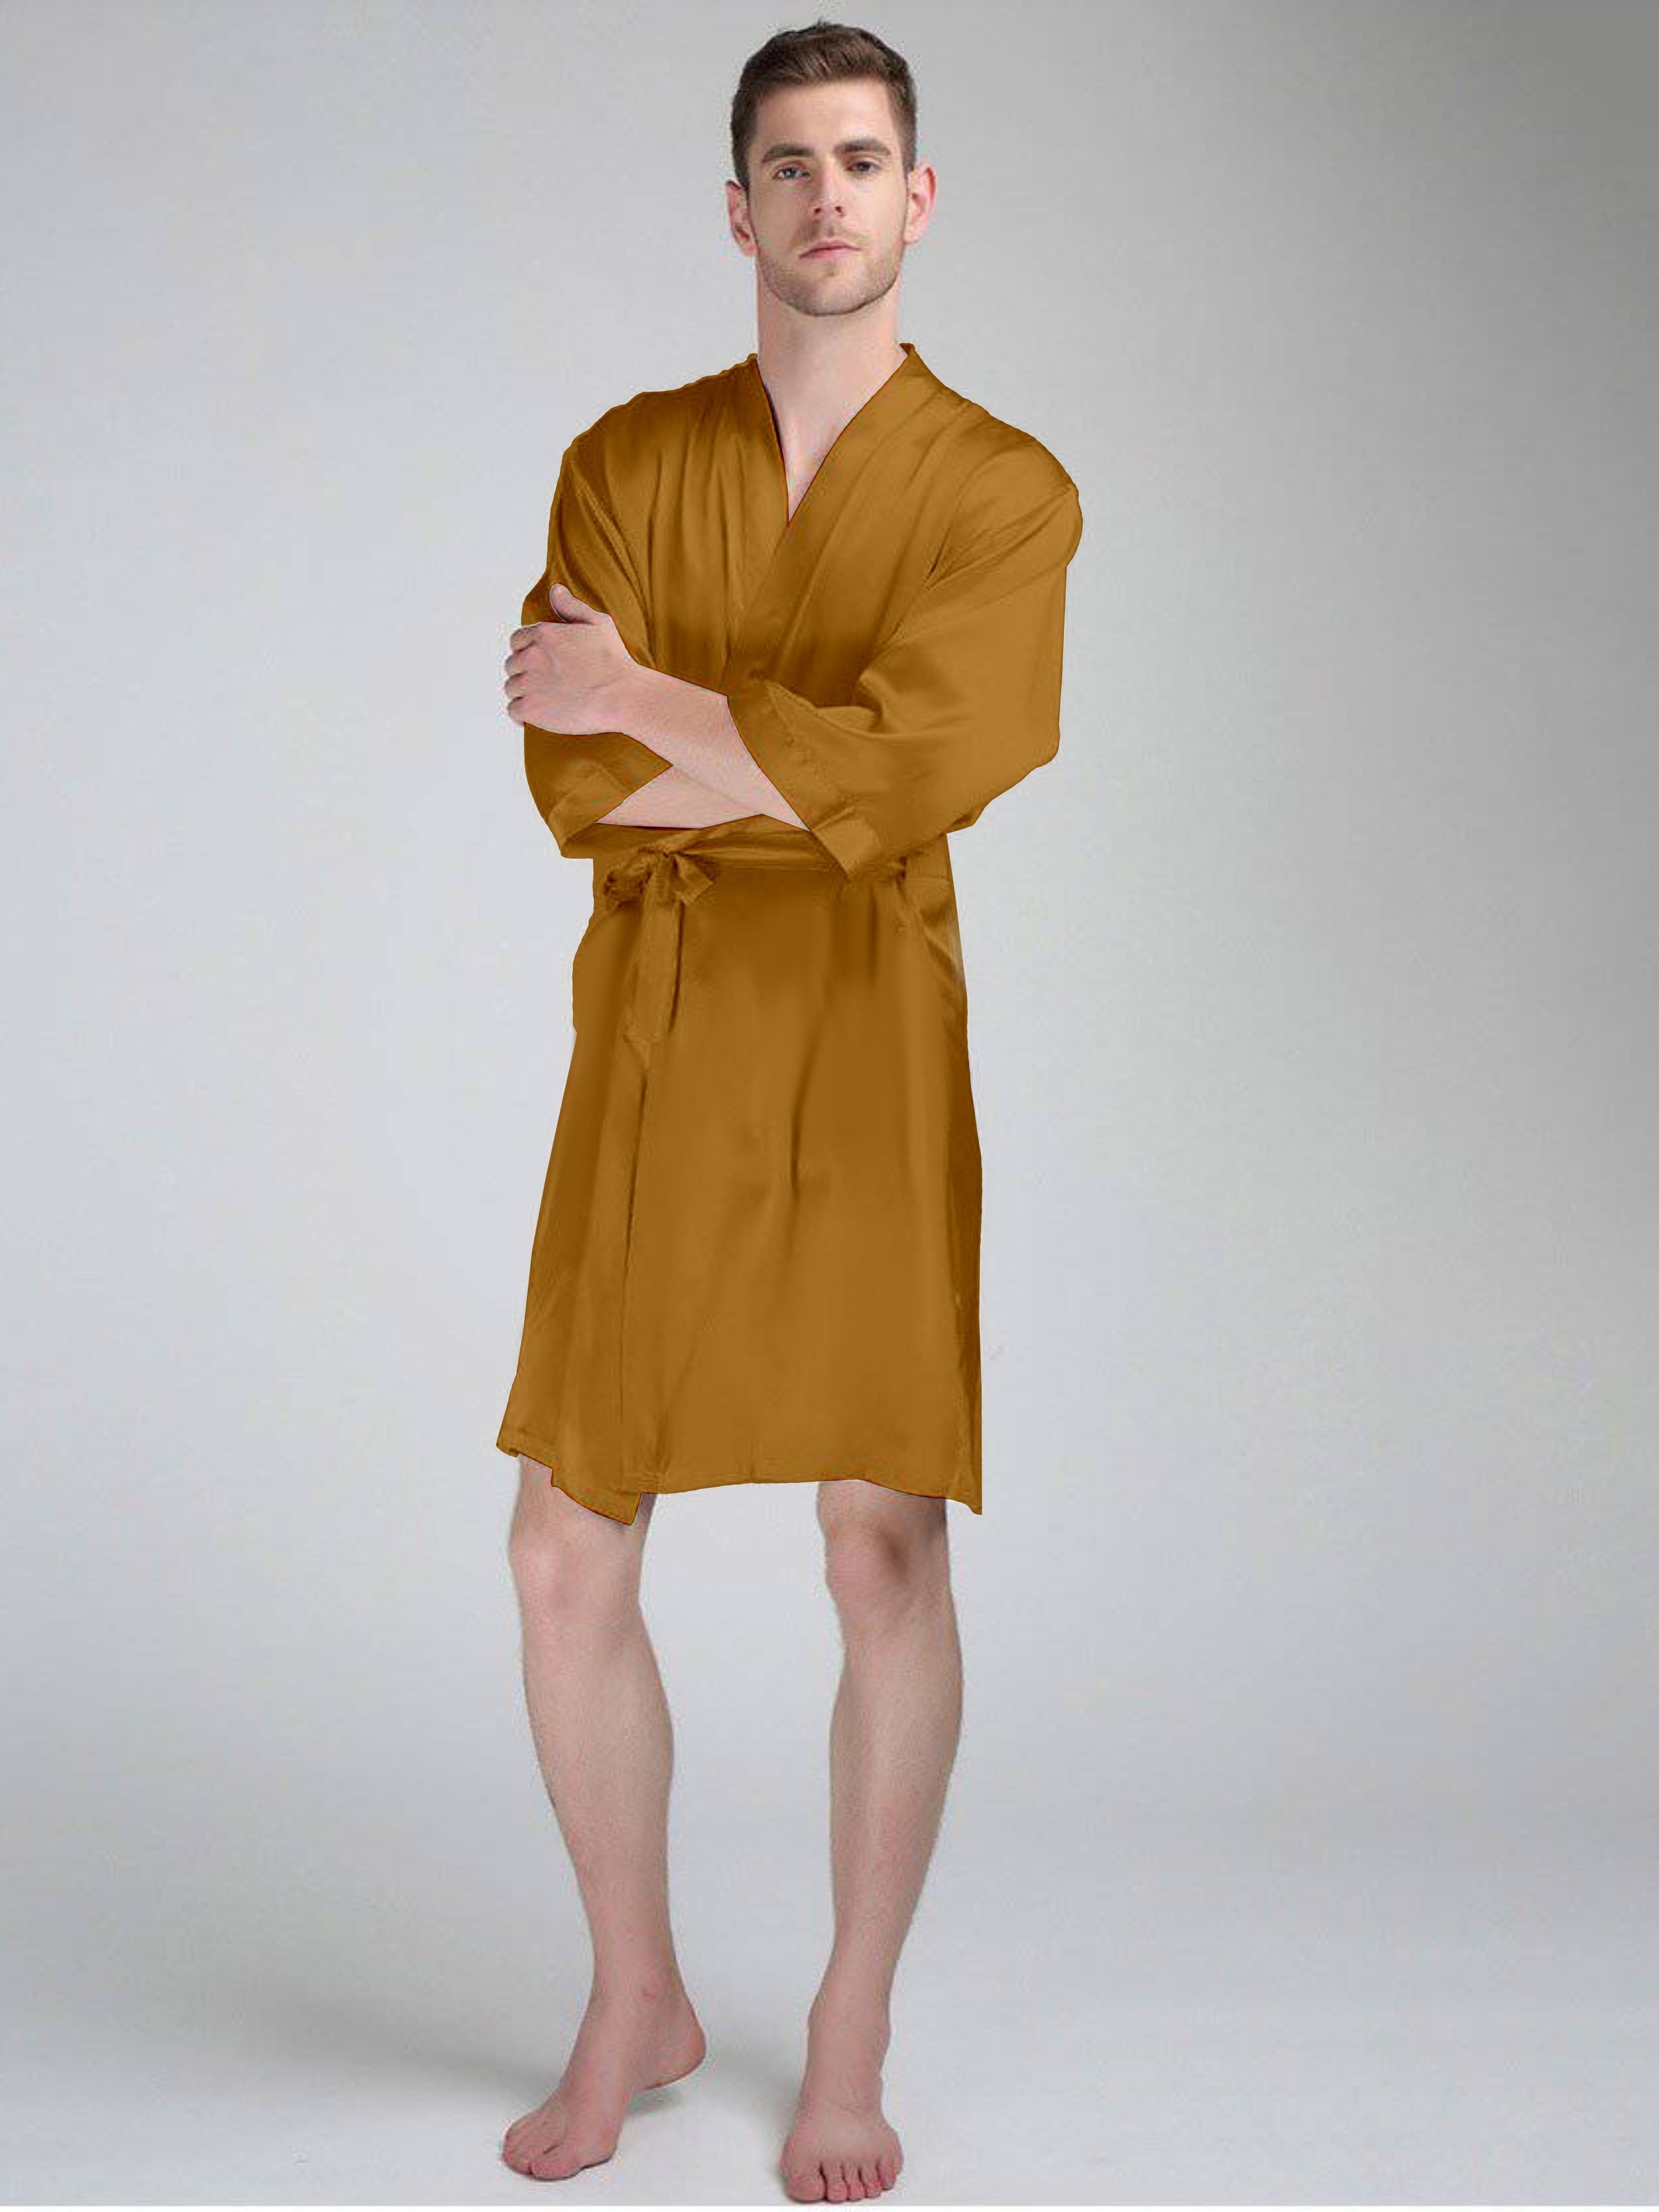 mens solid color bathrobe robe short style soft and comfortable satin pajamas for men